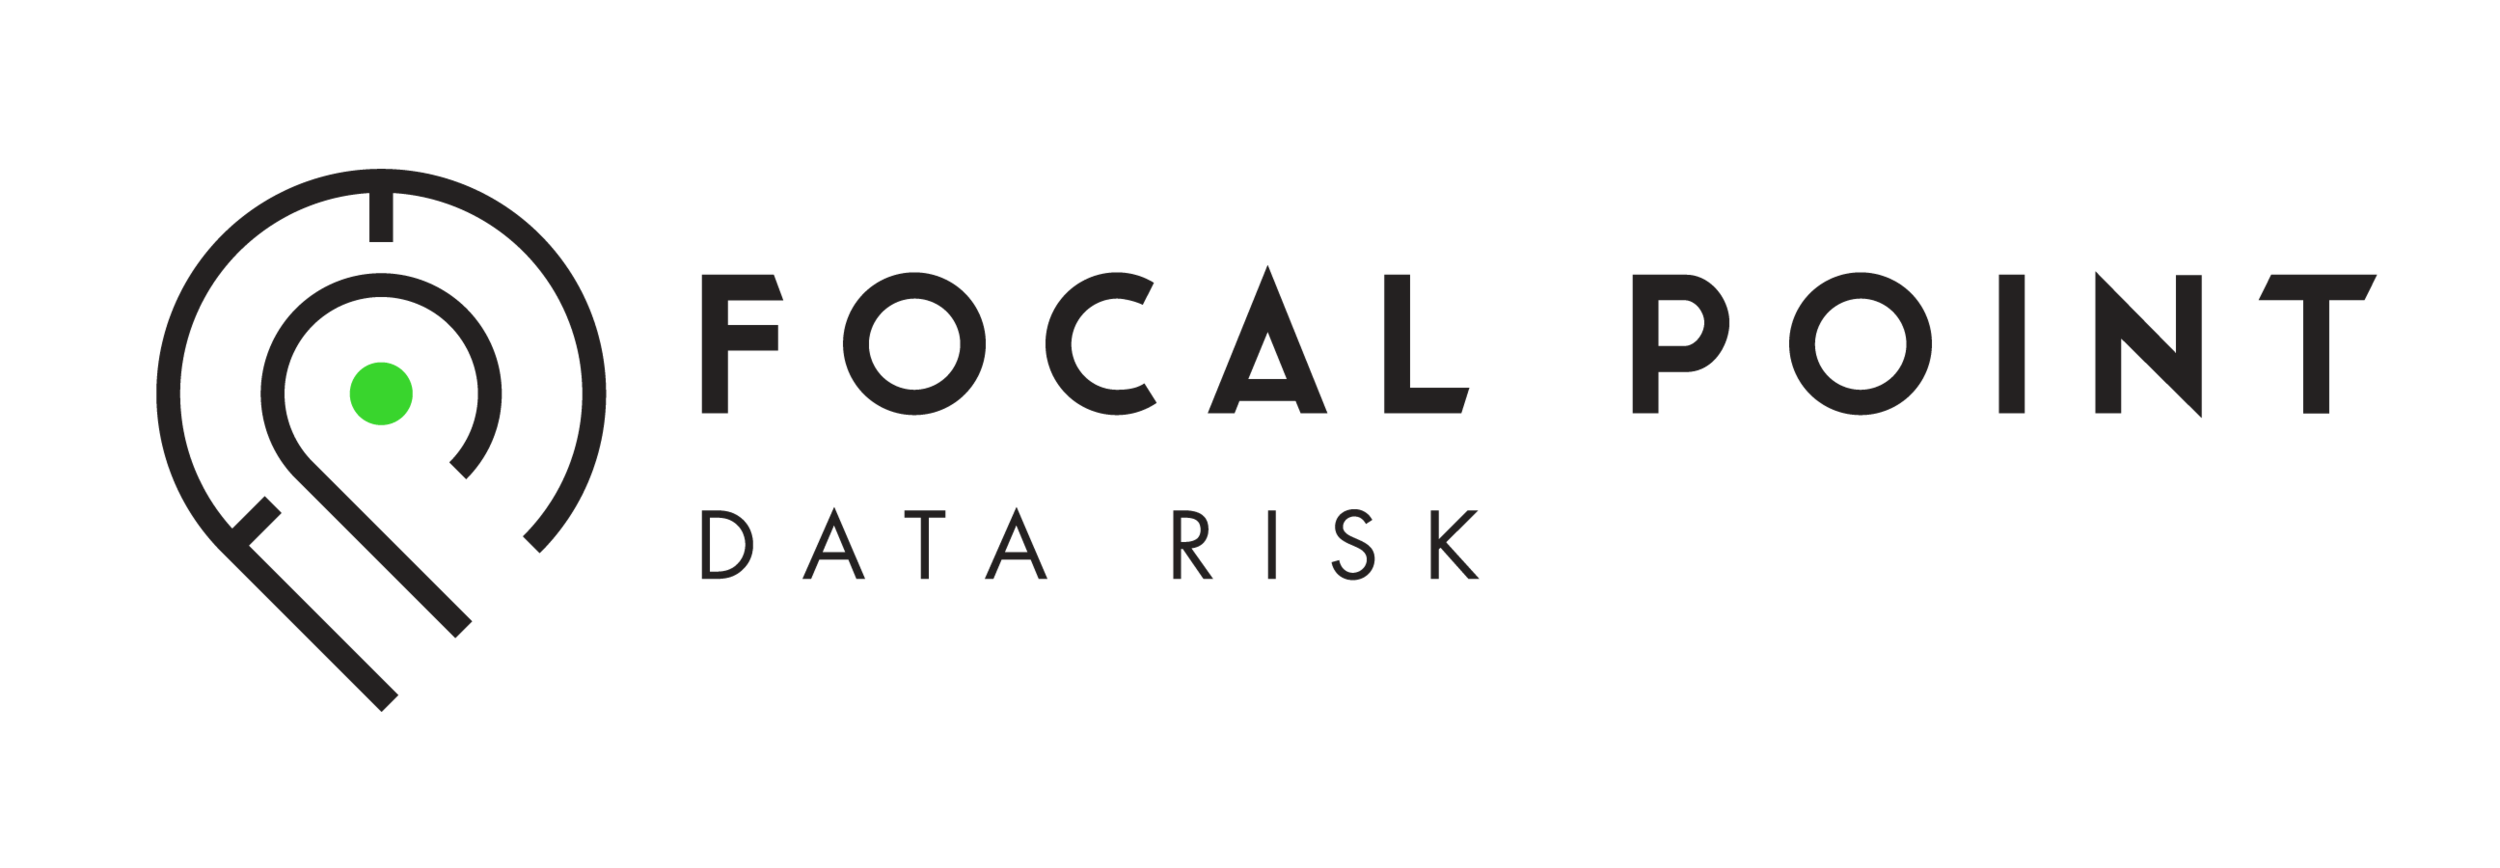 focal_point_logo.png